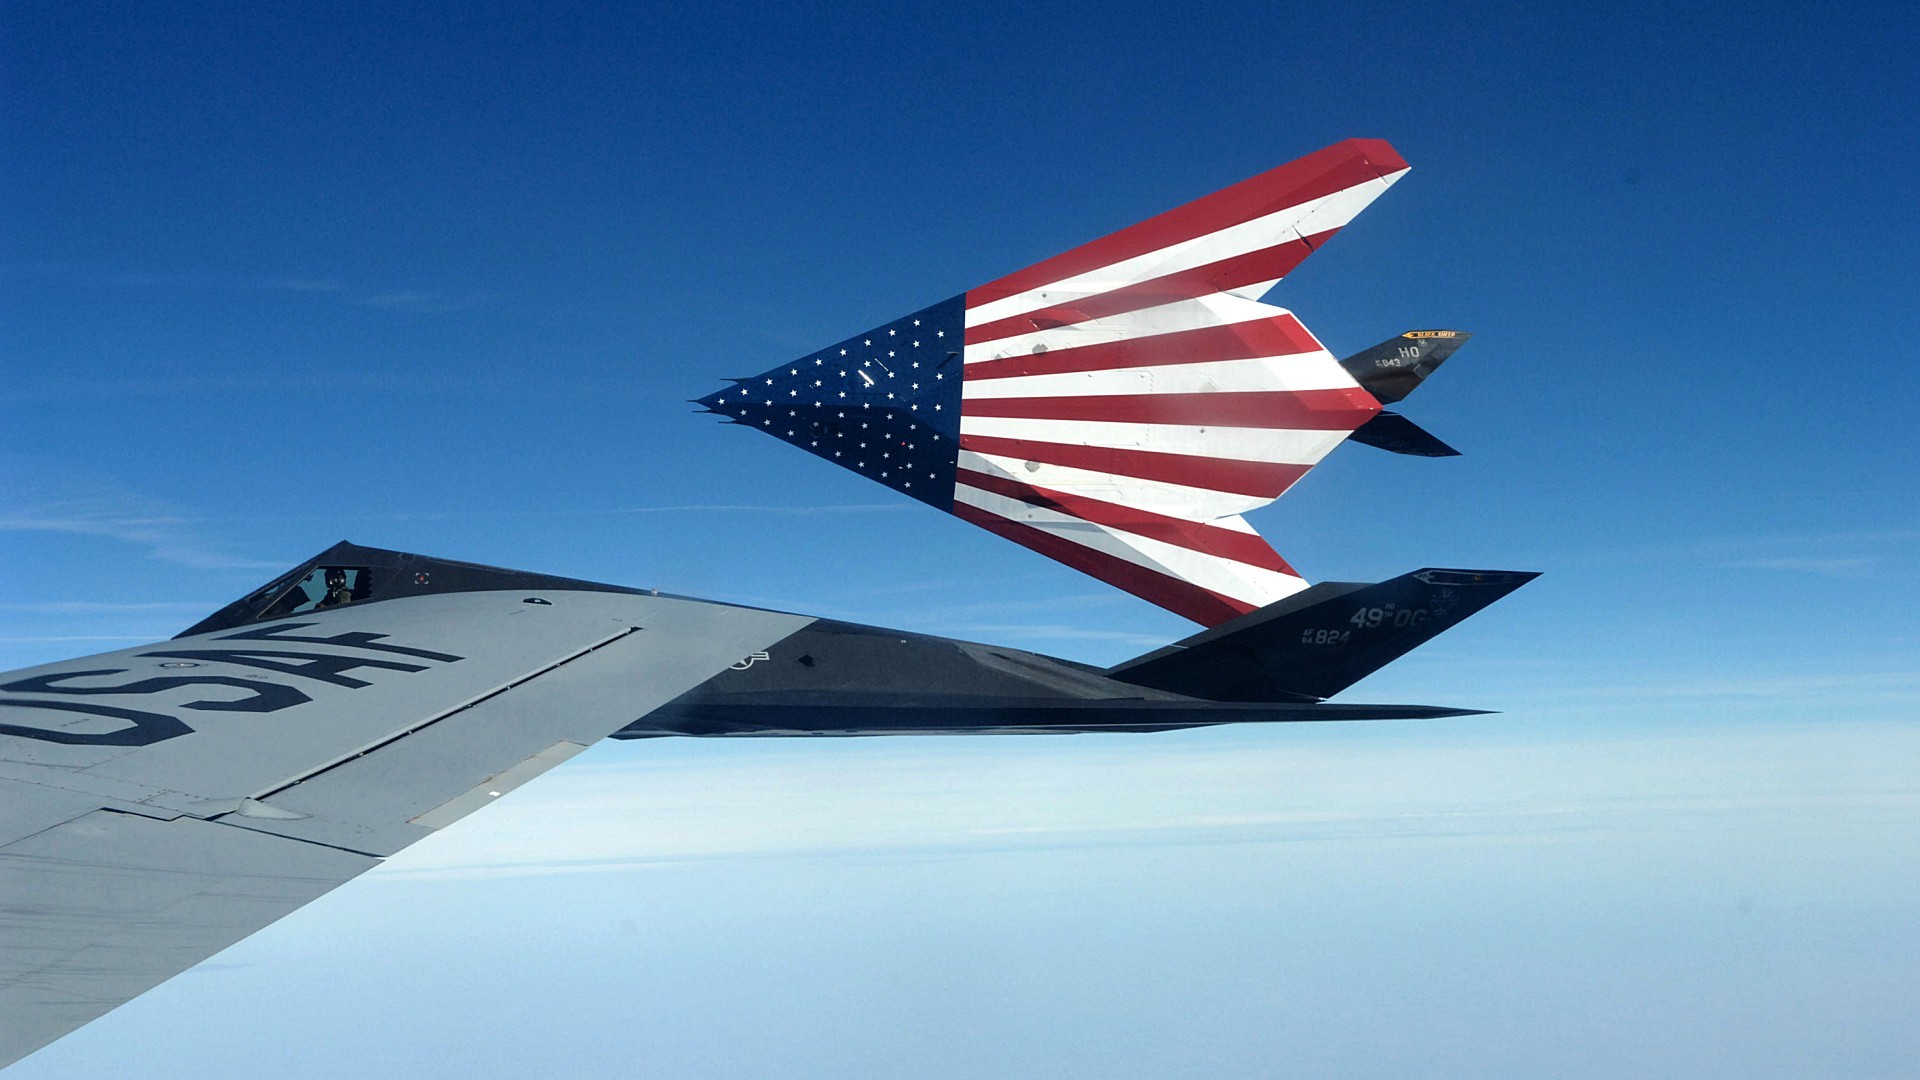 1920x1080 Free stealth aircraft wallpaper background